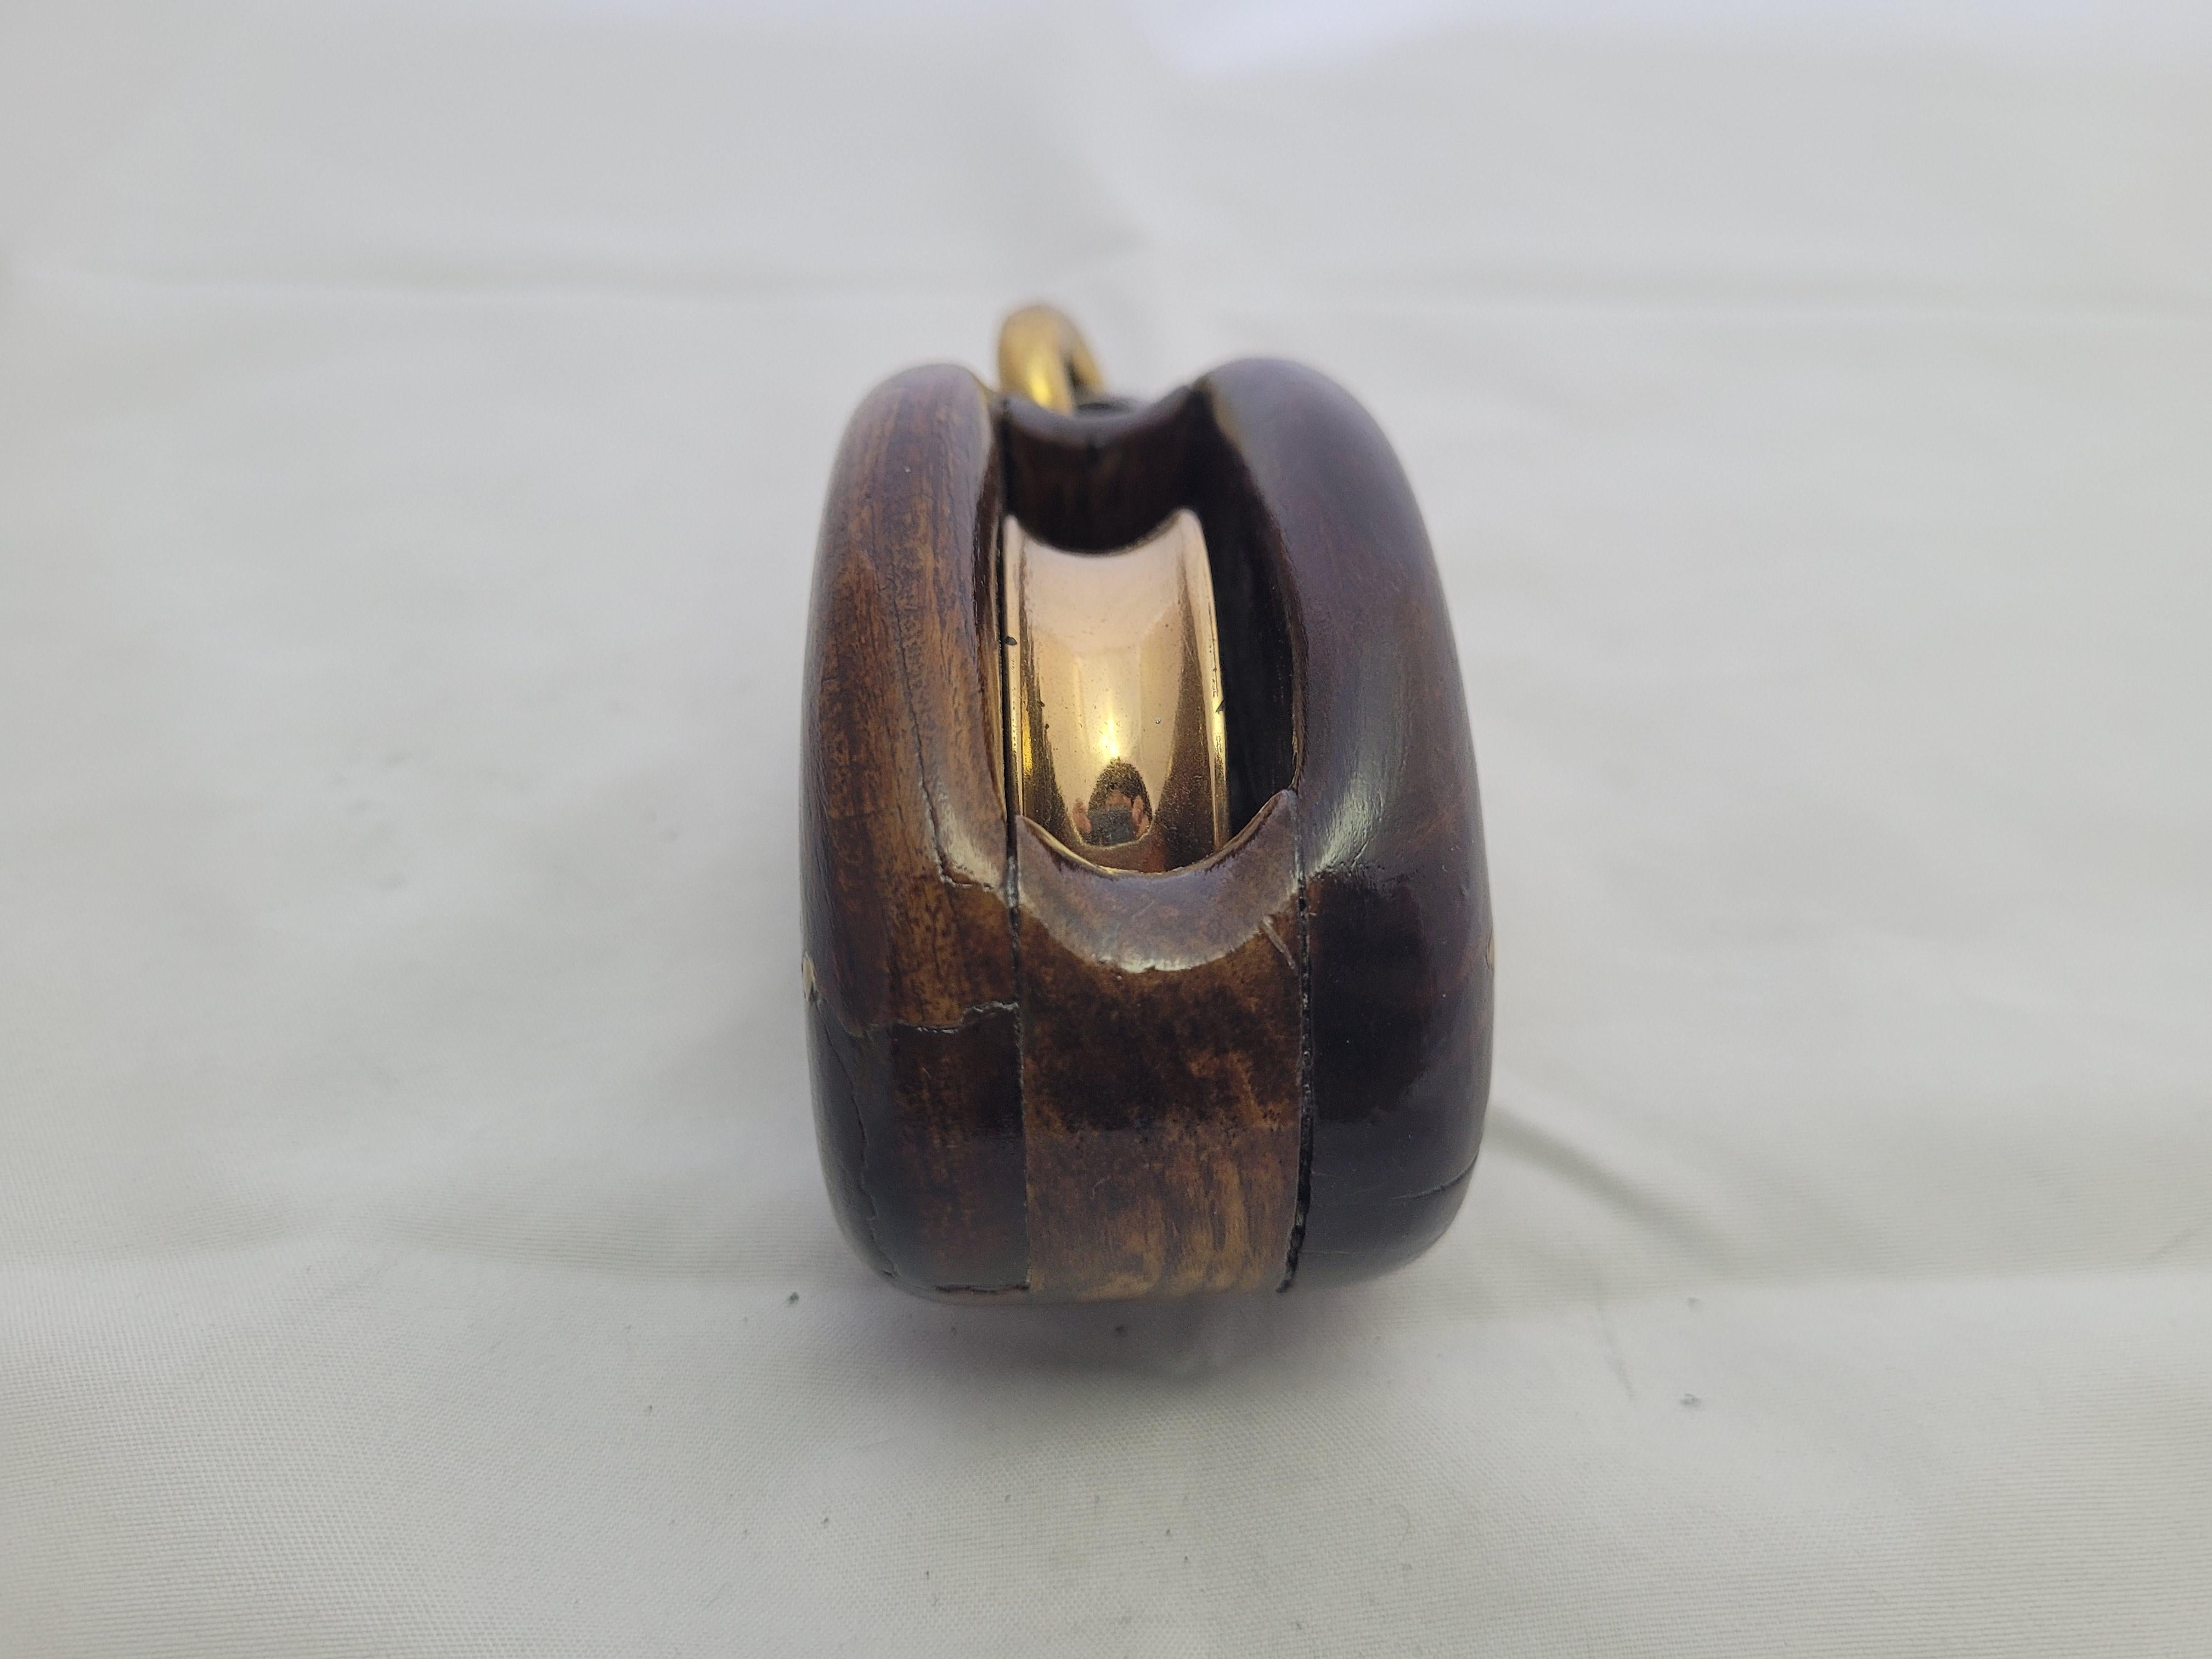 Mid-20th Century Yacht Pulley Block by Merriman For Sale